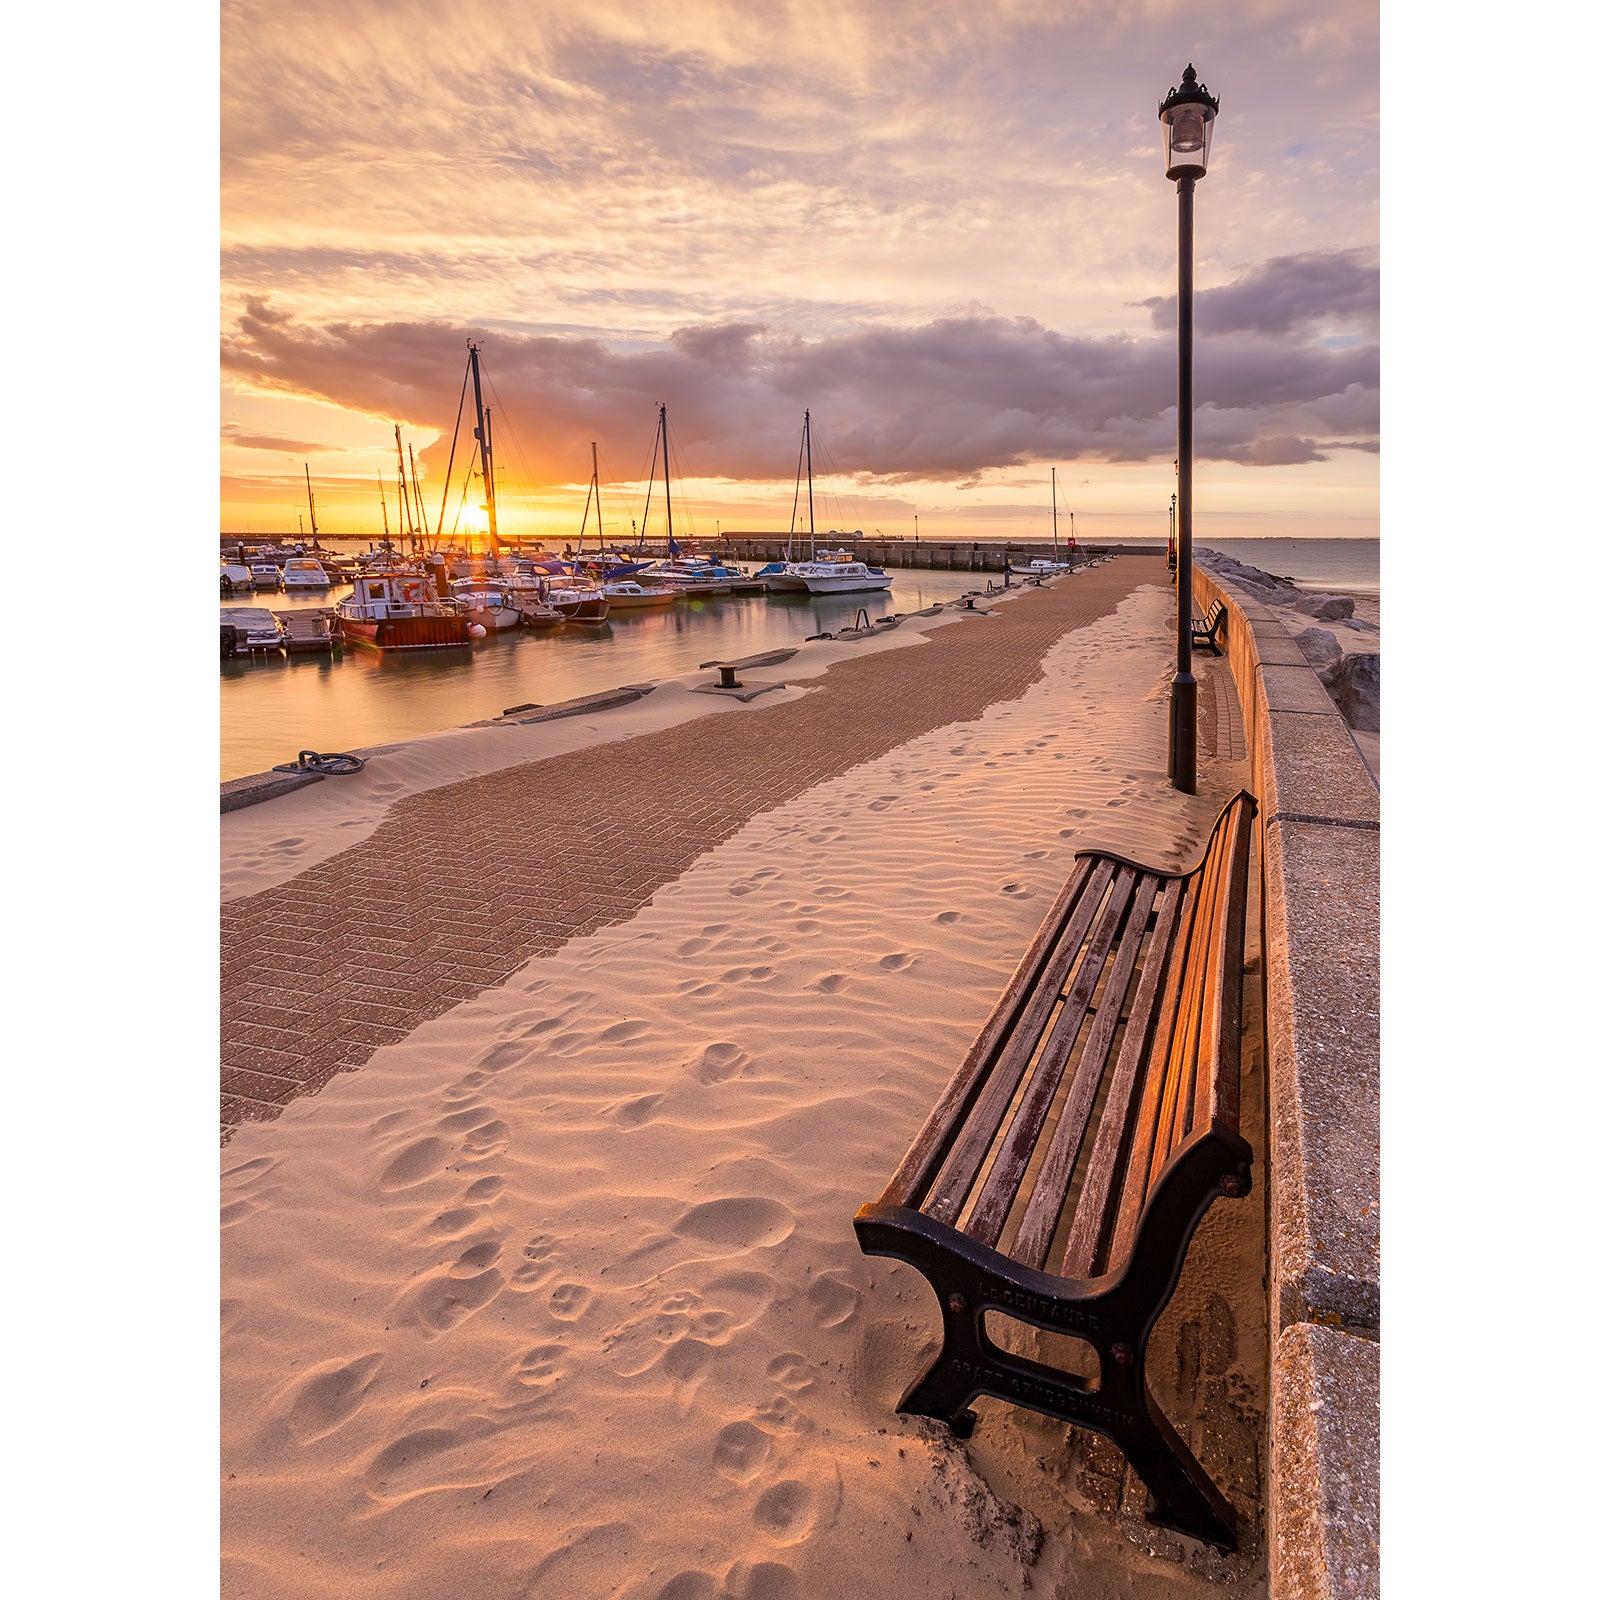 Sunset at Ryde Harbour with boats, a bench, and sand-covered pavement on the Isle of Wight by Available Light Photography.